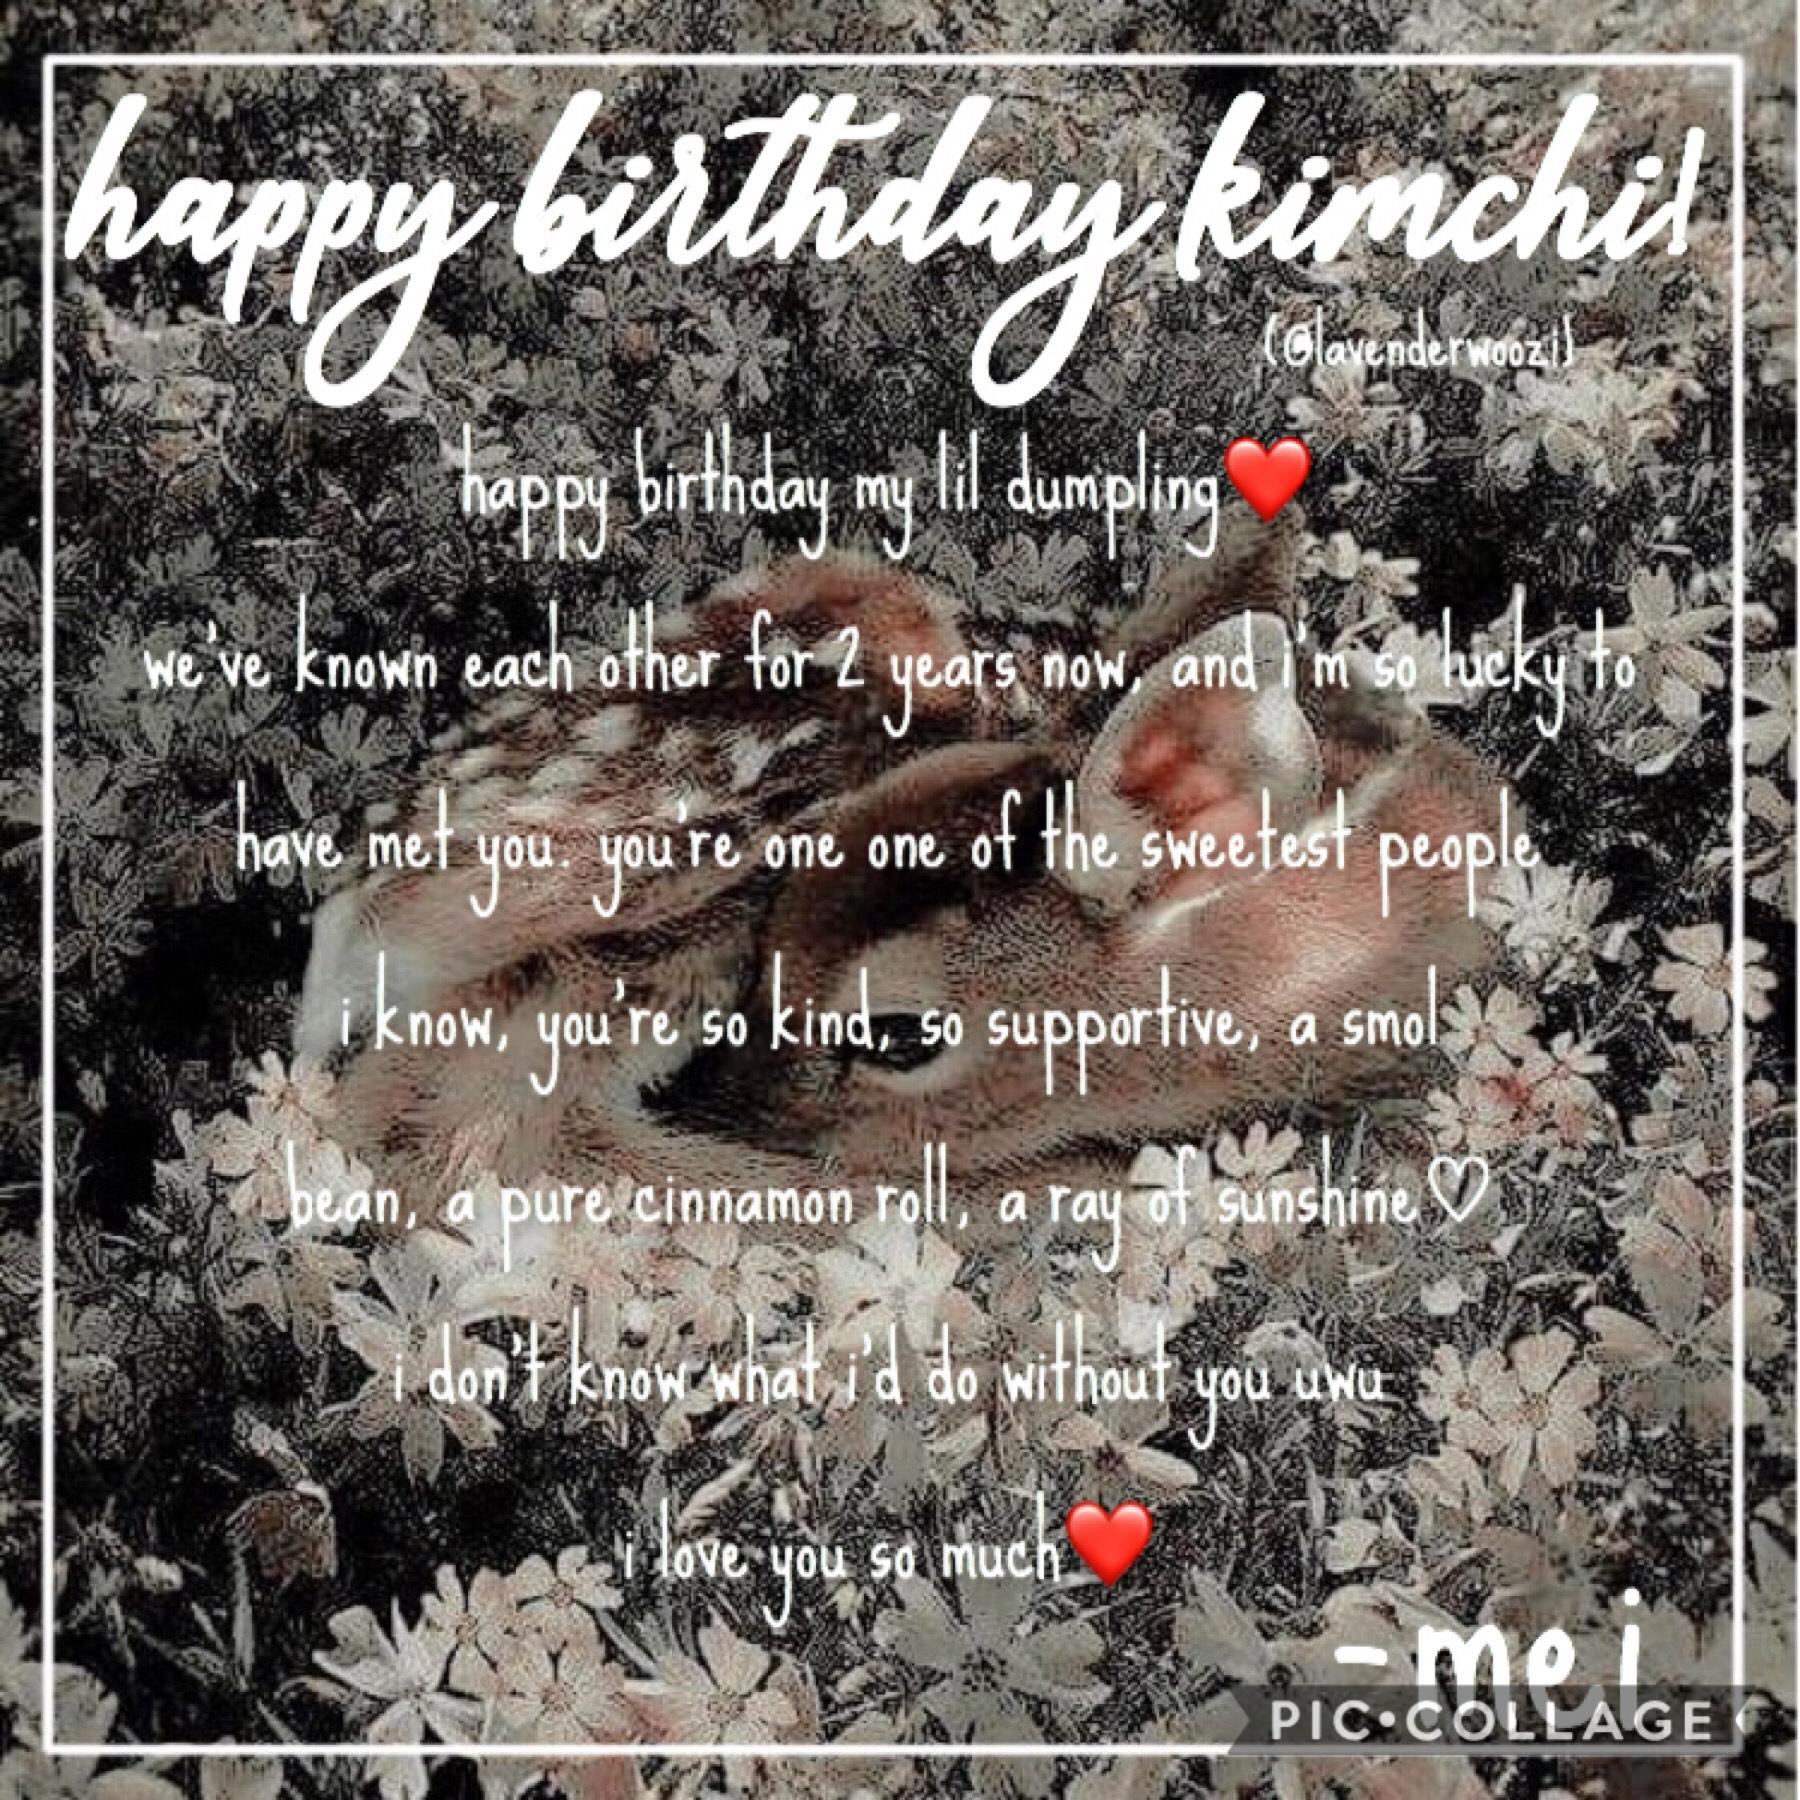 🌙 ｋｉｍｉｅ (tap)
IT’S @lavenderwoozi’s BDAY Y’ALL SKKDDKDK
she’s on private and deleted her twitter acc 😔 but she’s, like, the loml so i nEEDED to make a bday card uwu
happy birthday kim~ i hope you come back and see this :(((
(kimchi, if ur reading this, pl